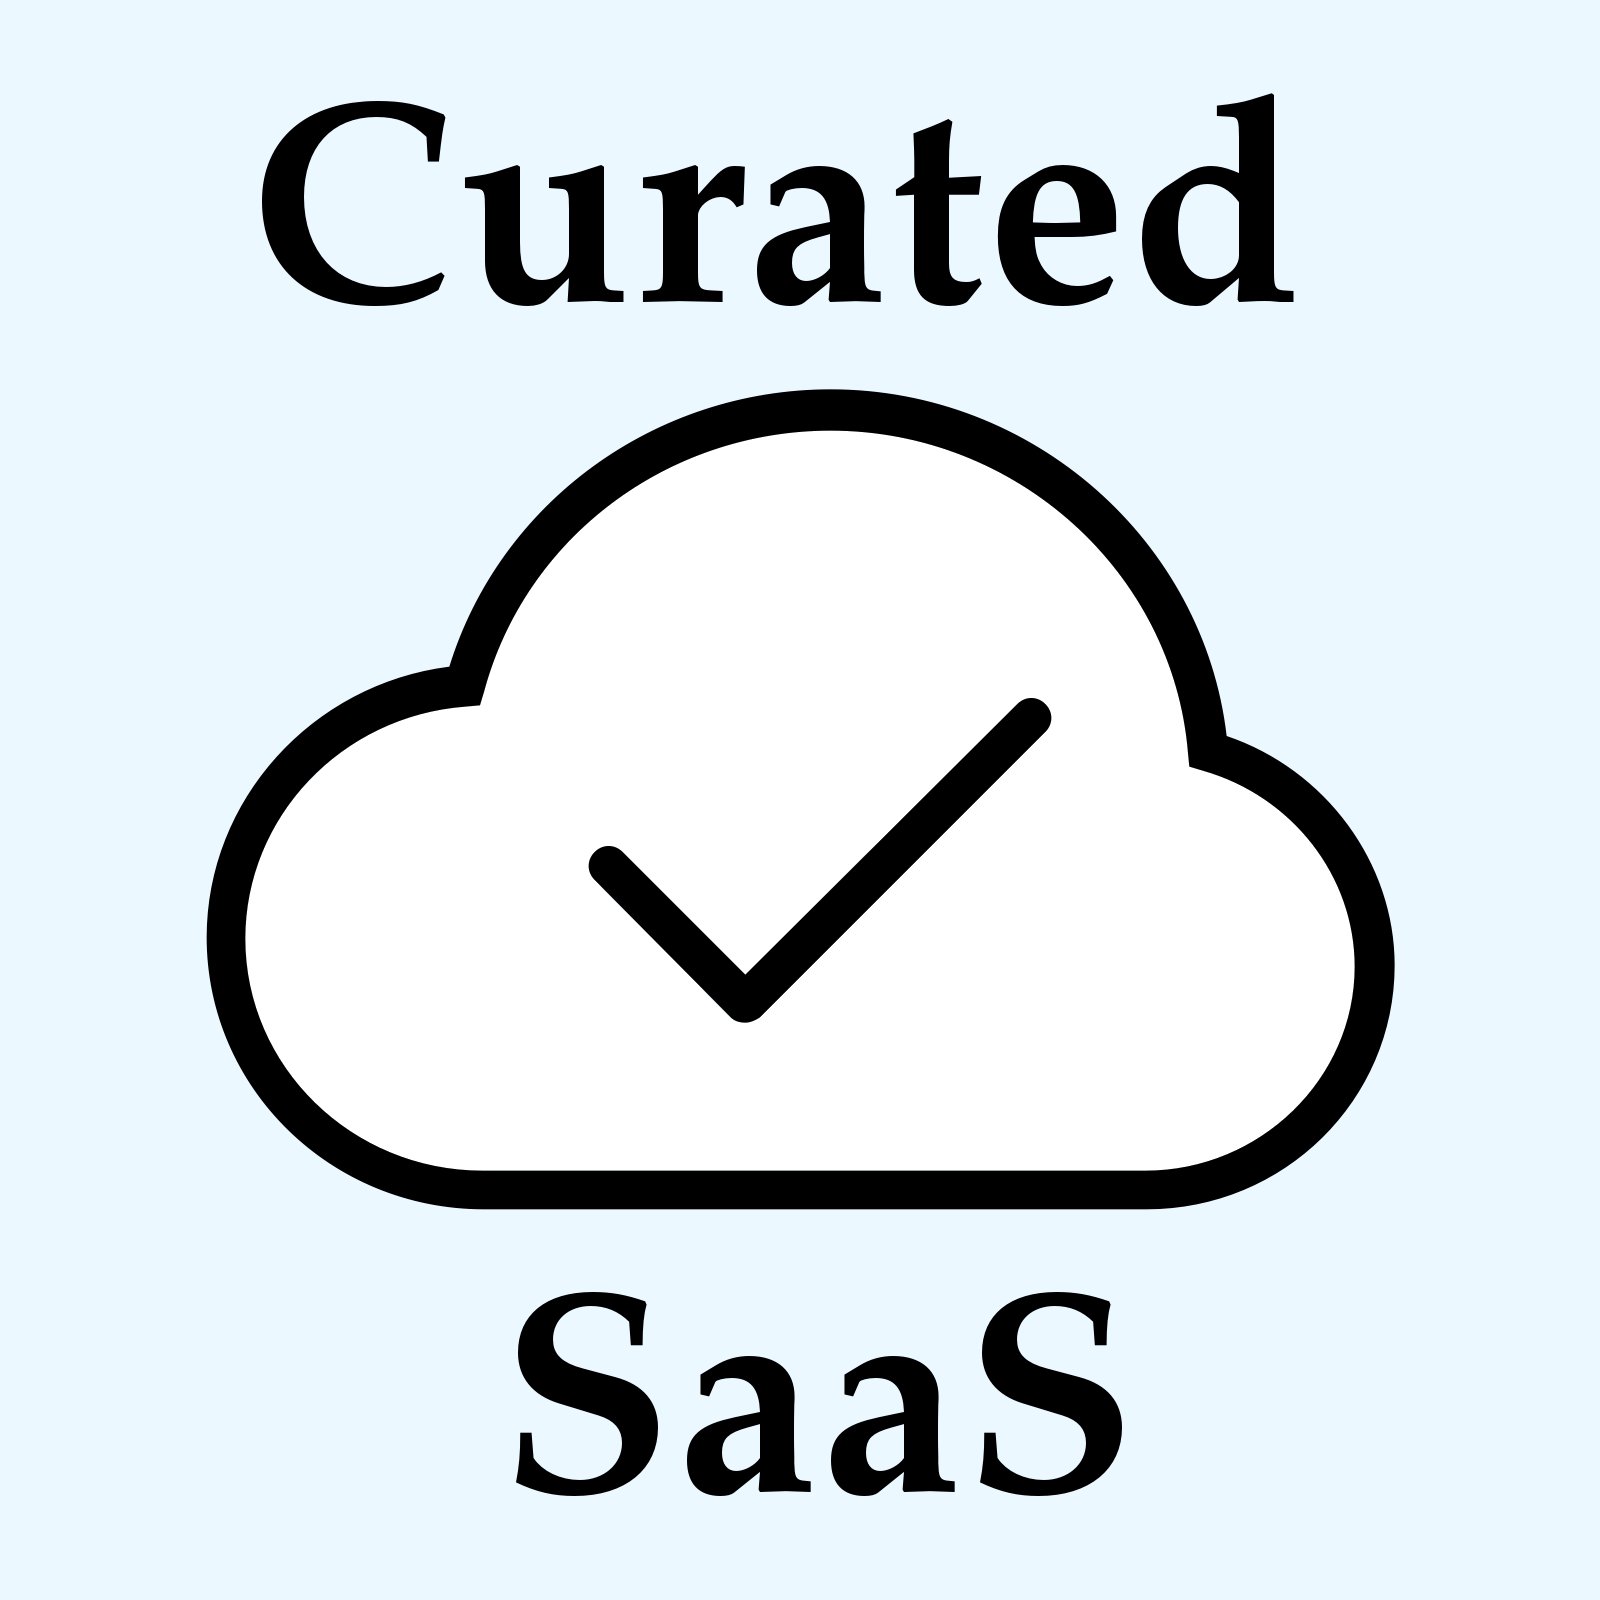 Links to great #SaaS articles and videos. Expect 1-3 per day (except Sunday). Tweets by @andychilton. Part of @CuratedPress.